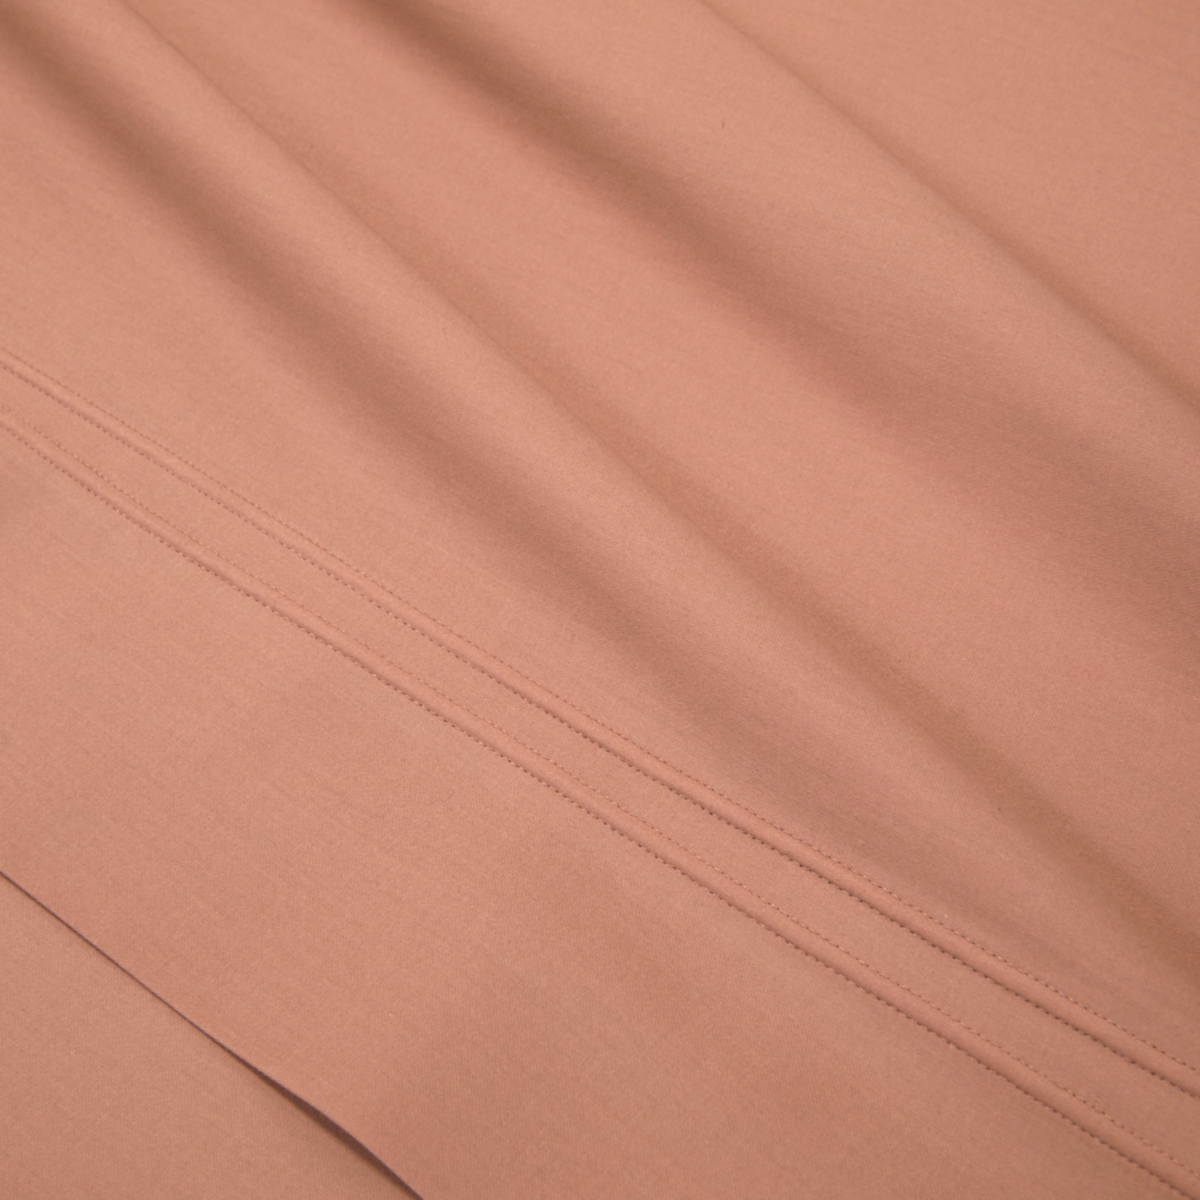 Fabric Detail of Yves Delorme Triomphe Bedding in Sienna Color